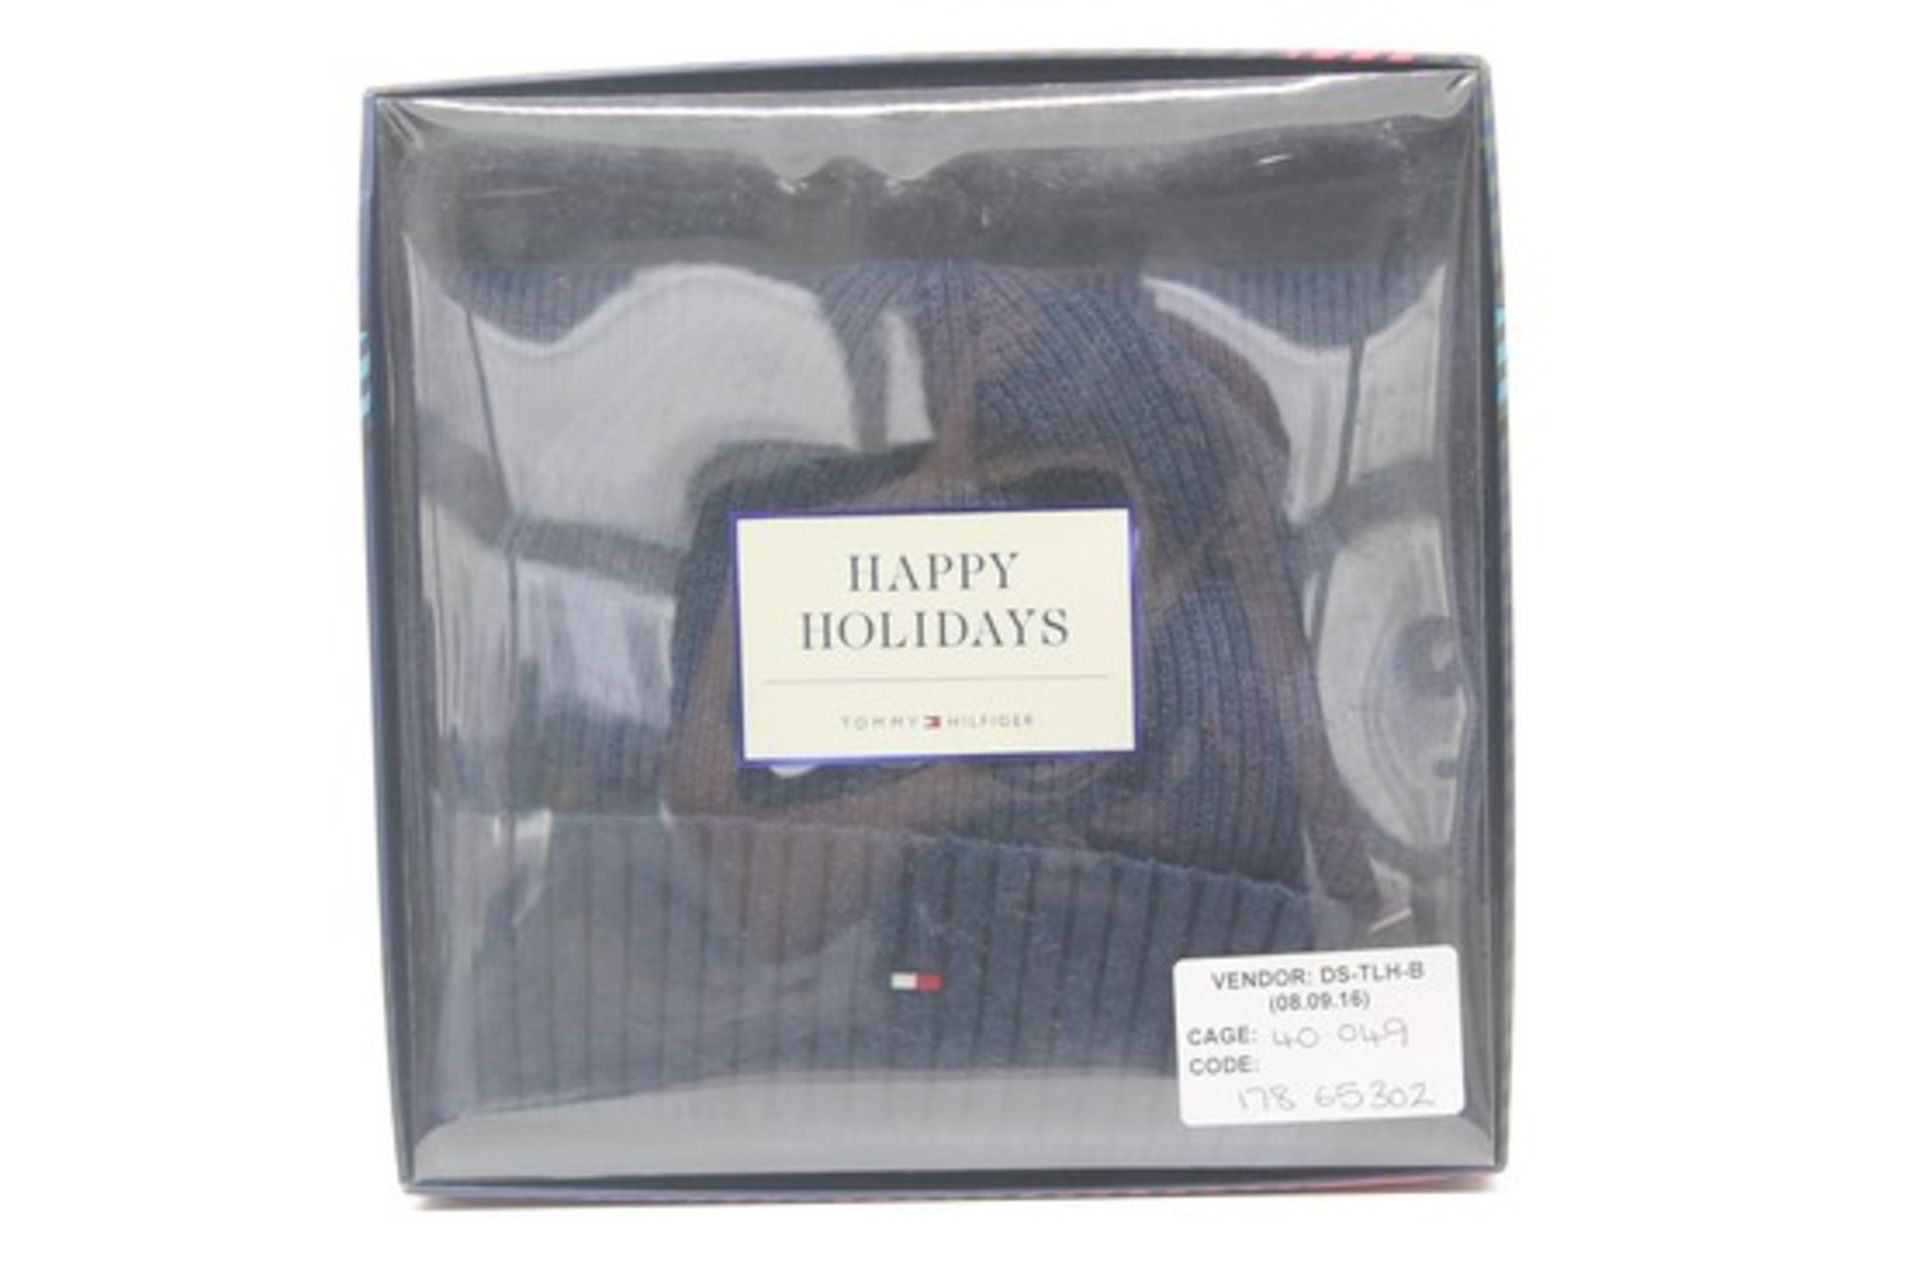 BOXED BRAND NEW TOMMY HILFIGER HAPPY HOLIDAYS HAT AND SCARF SET RRP £85 (DSSALVAGE)